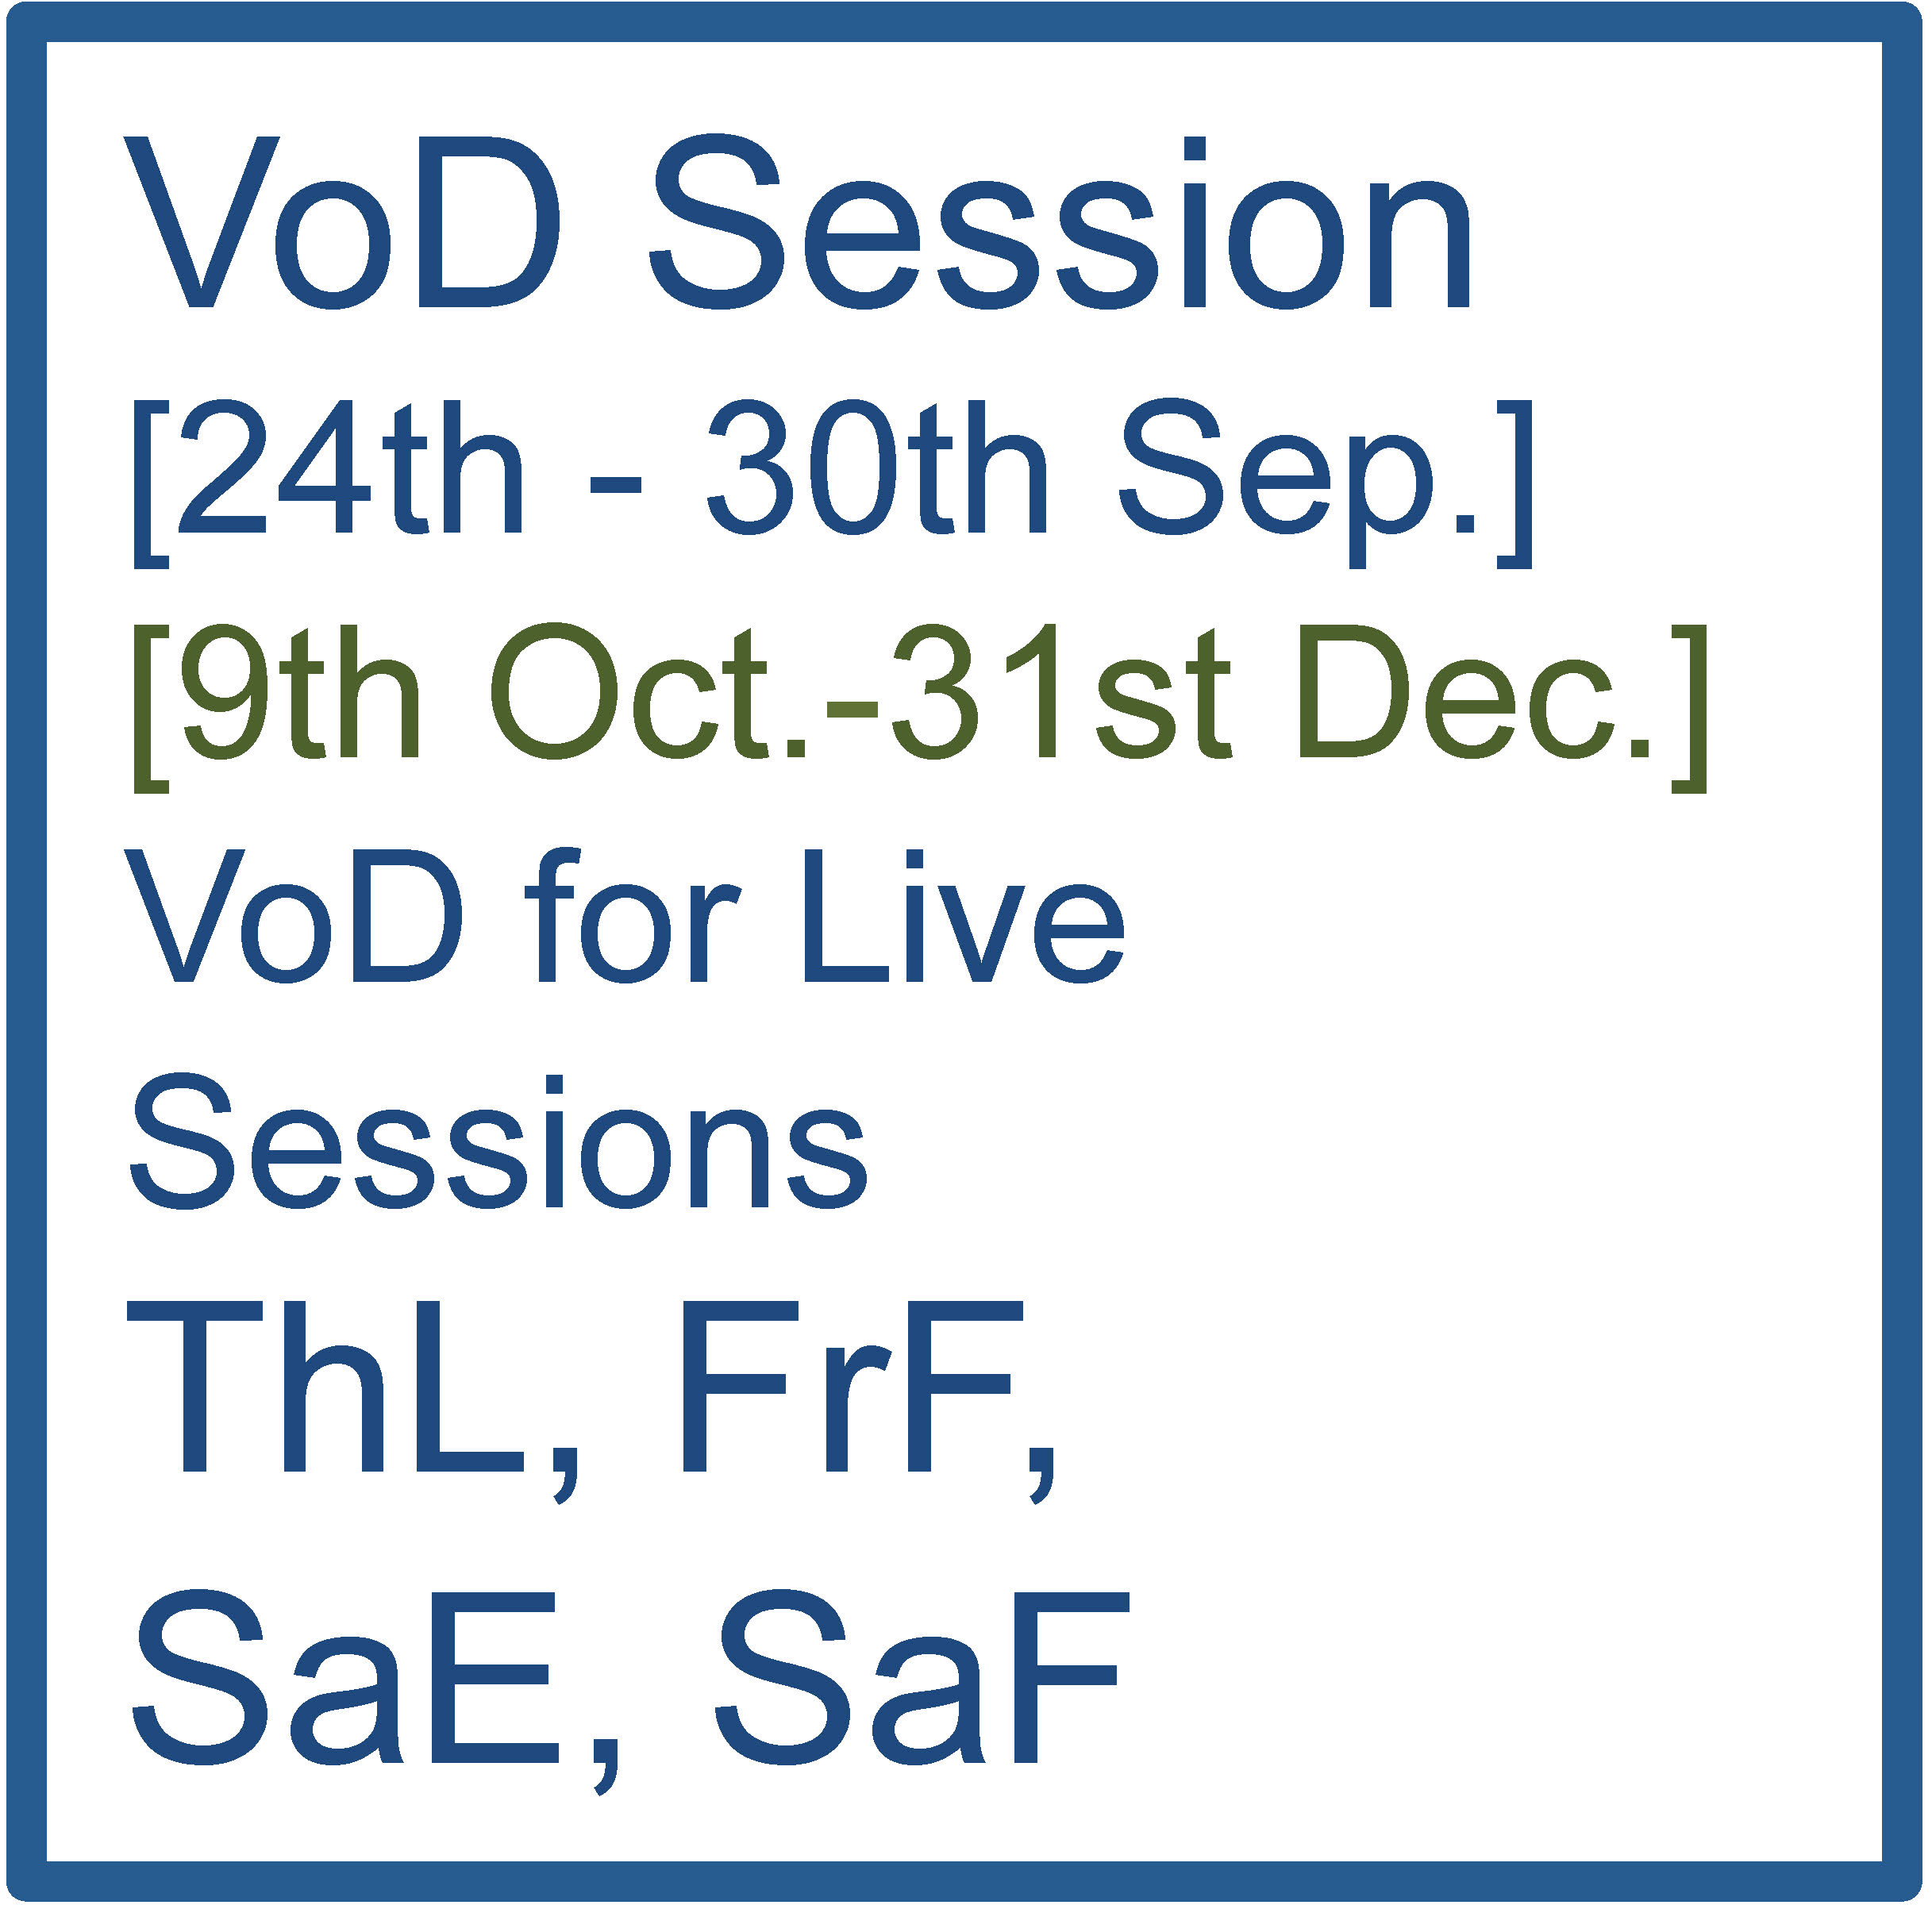 VoD for Live Sessions